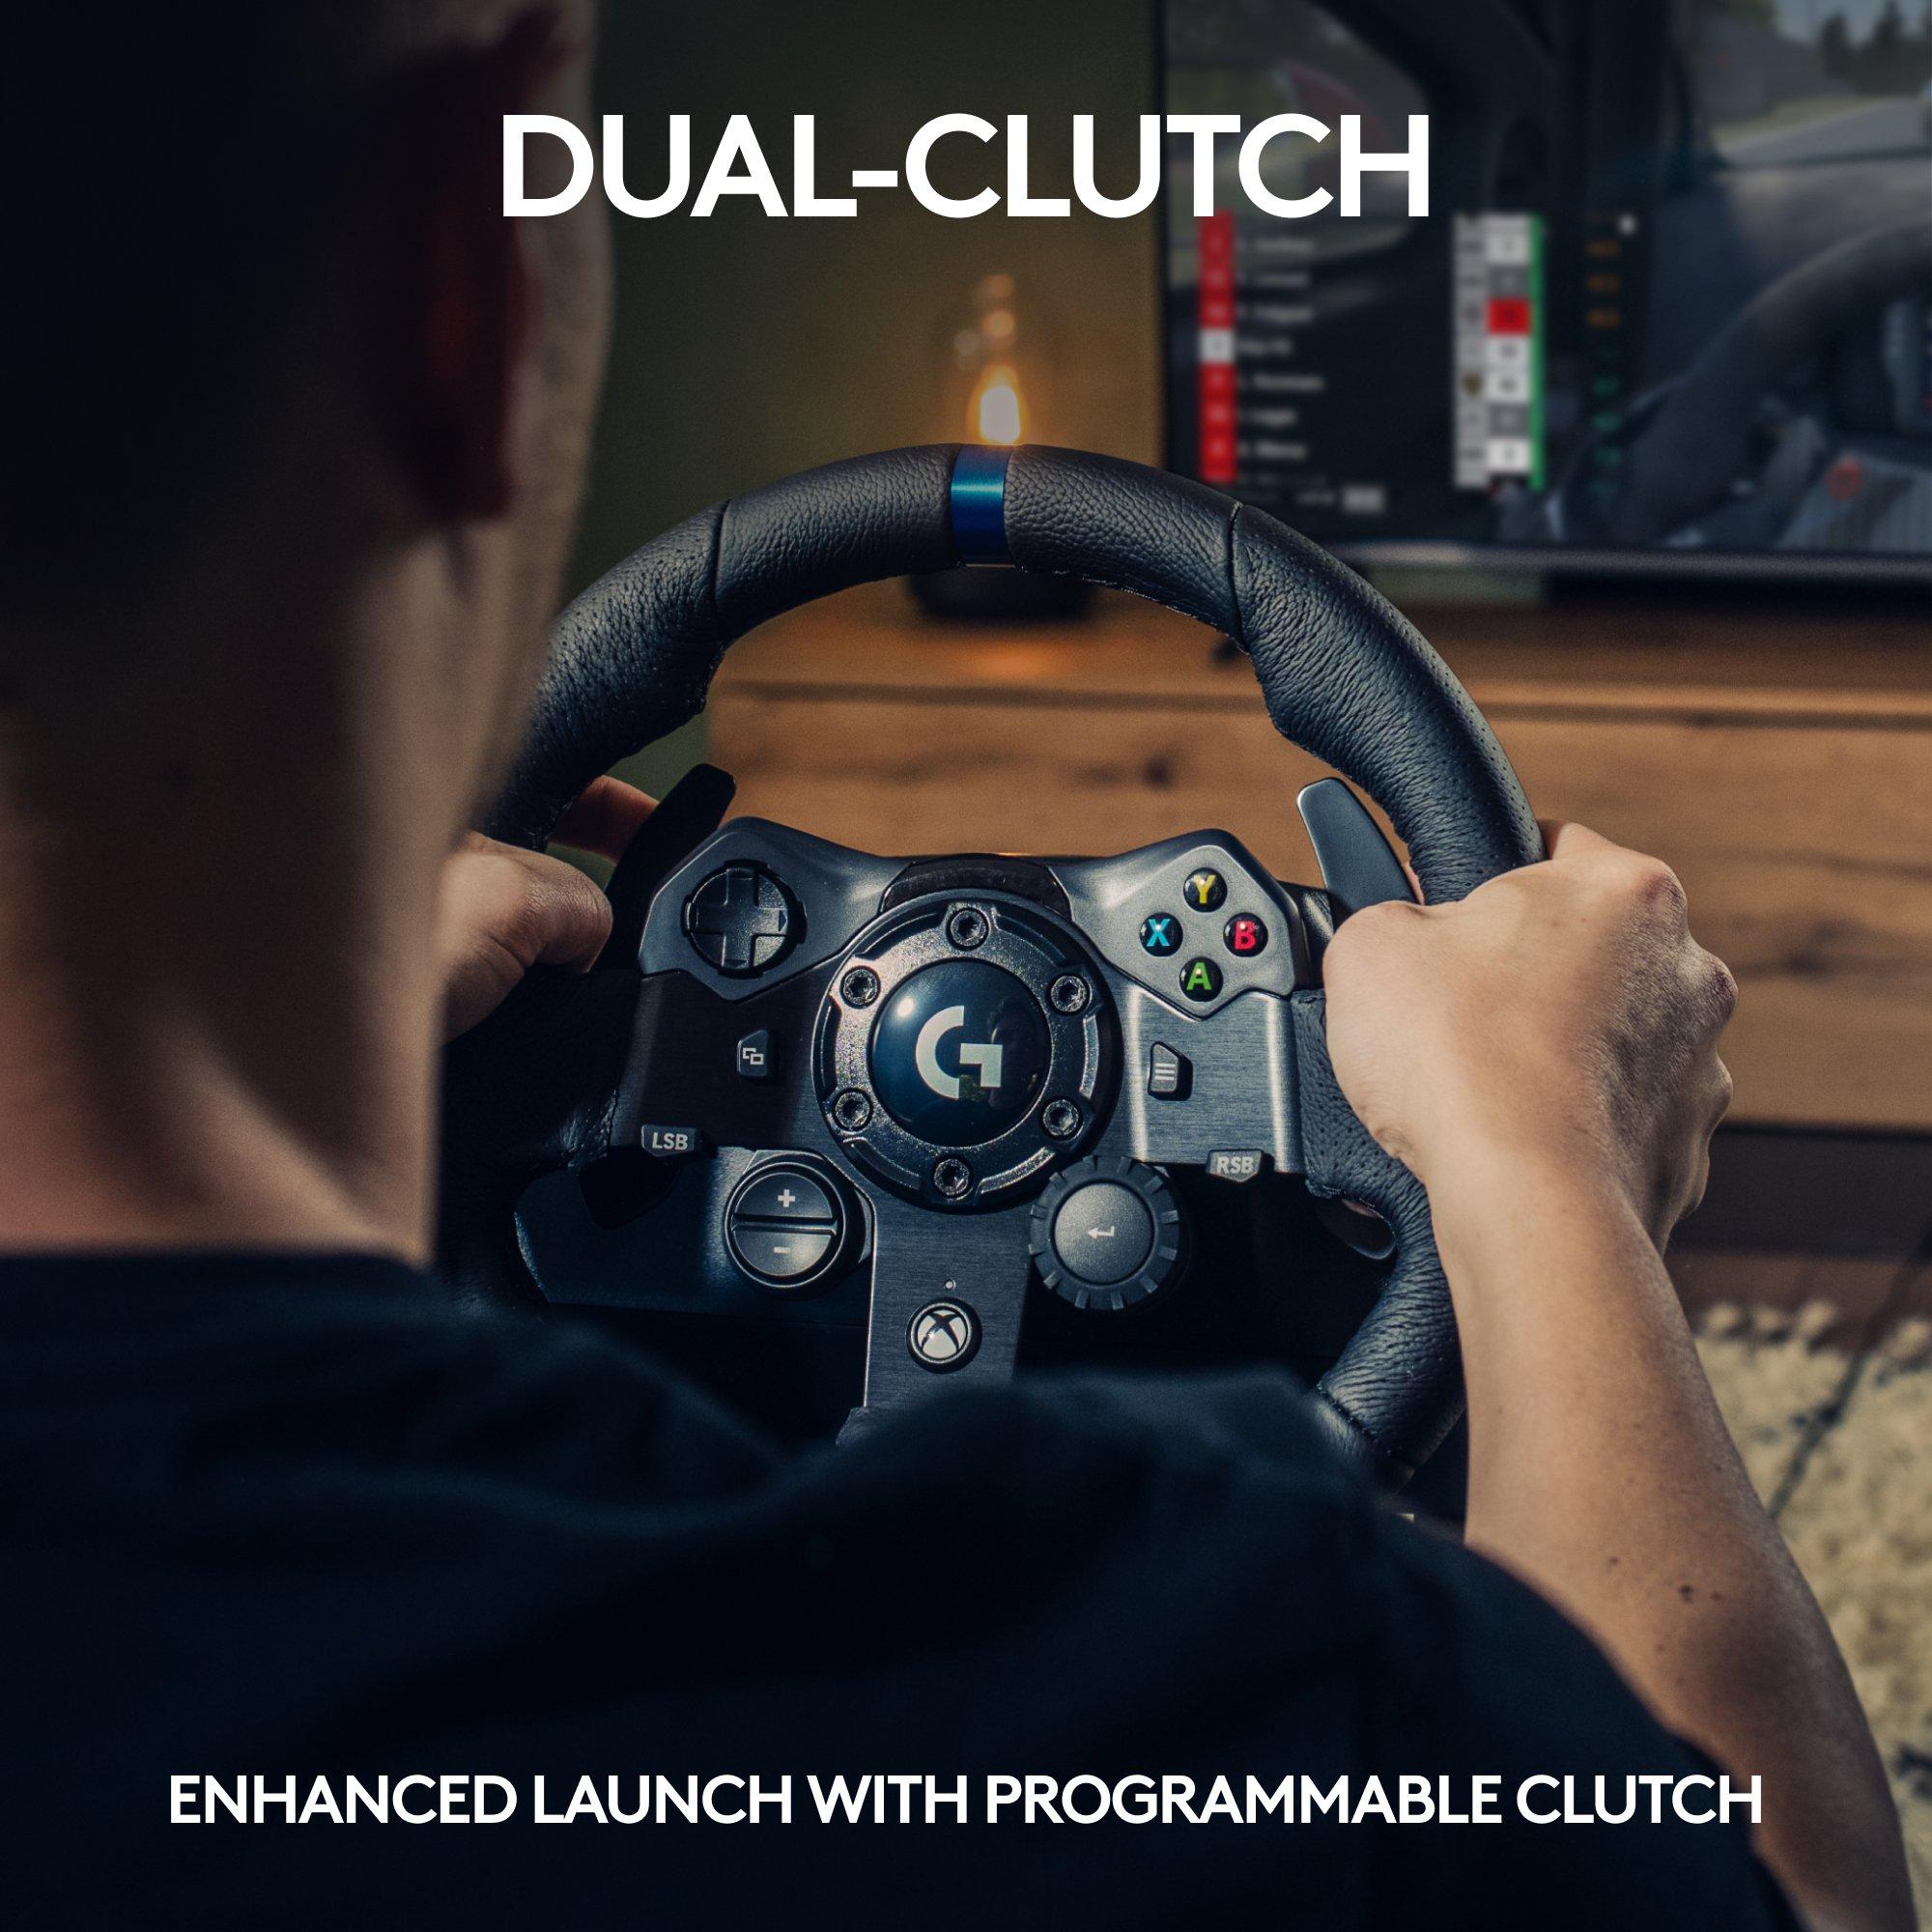 VOLANTE LOGITECH G923 GAMING RACING WHELL & PEDALS